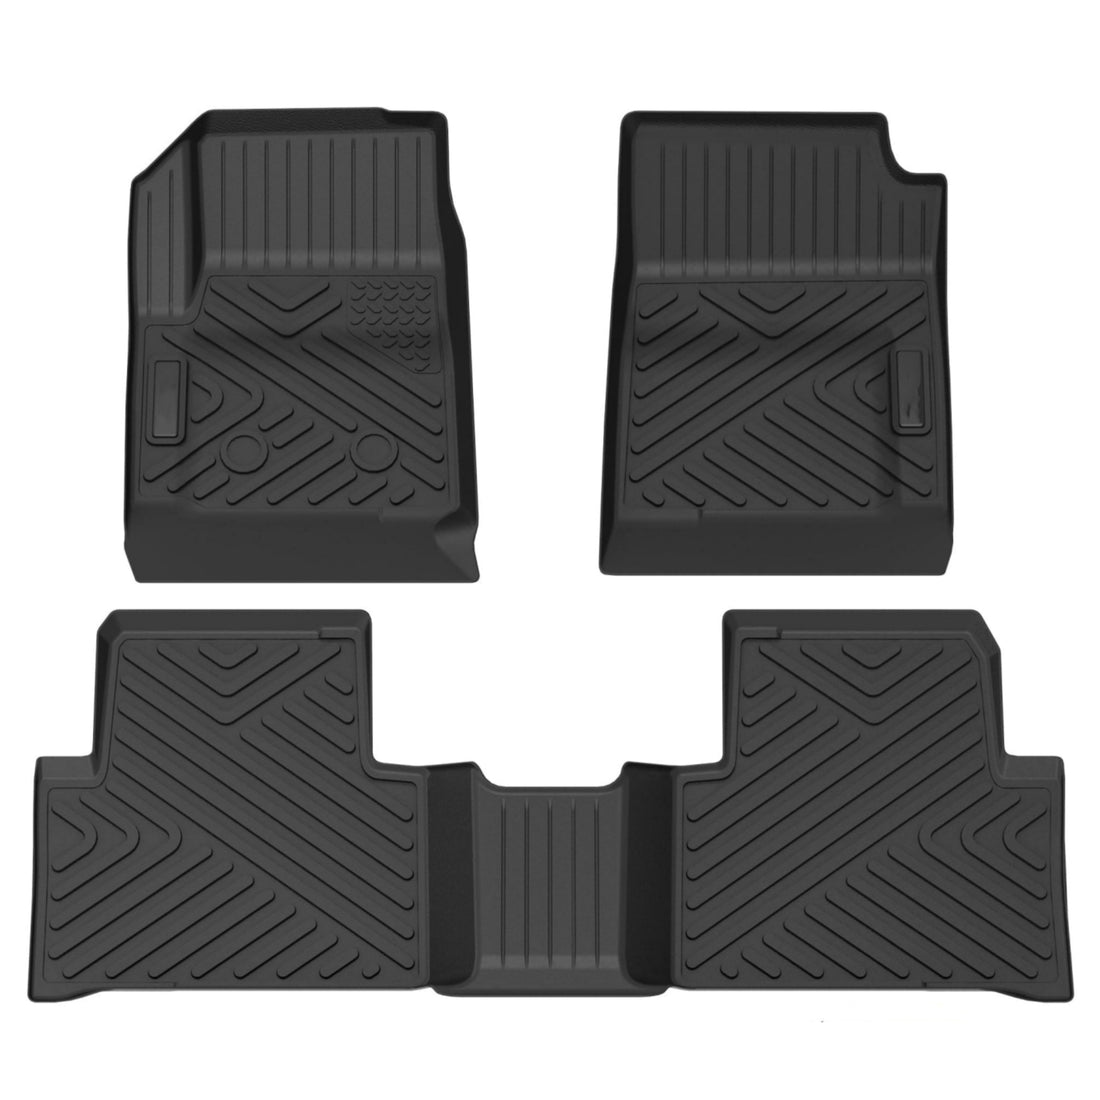 Custom Fit Floor Mats Compatible with 2015-2022 Chevy Colorado Crew Cab/GMC Canyon Crew Cab, Black TPE All-Weather Car Floor Liners, Front & Rear Row Se